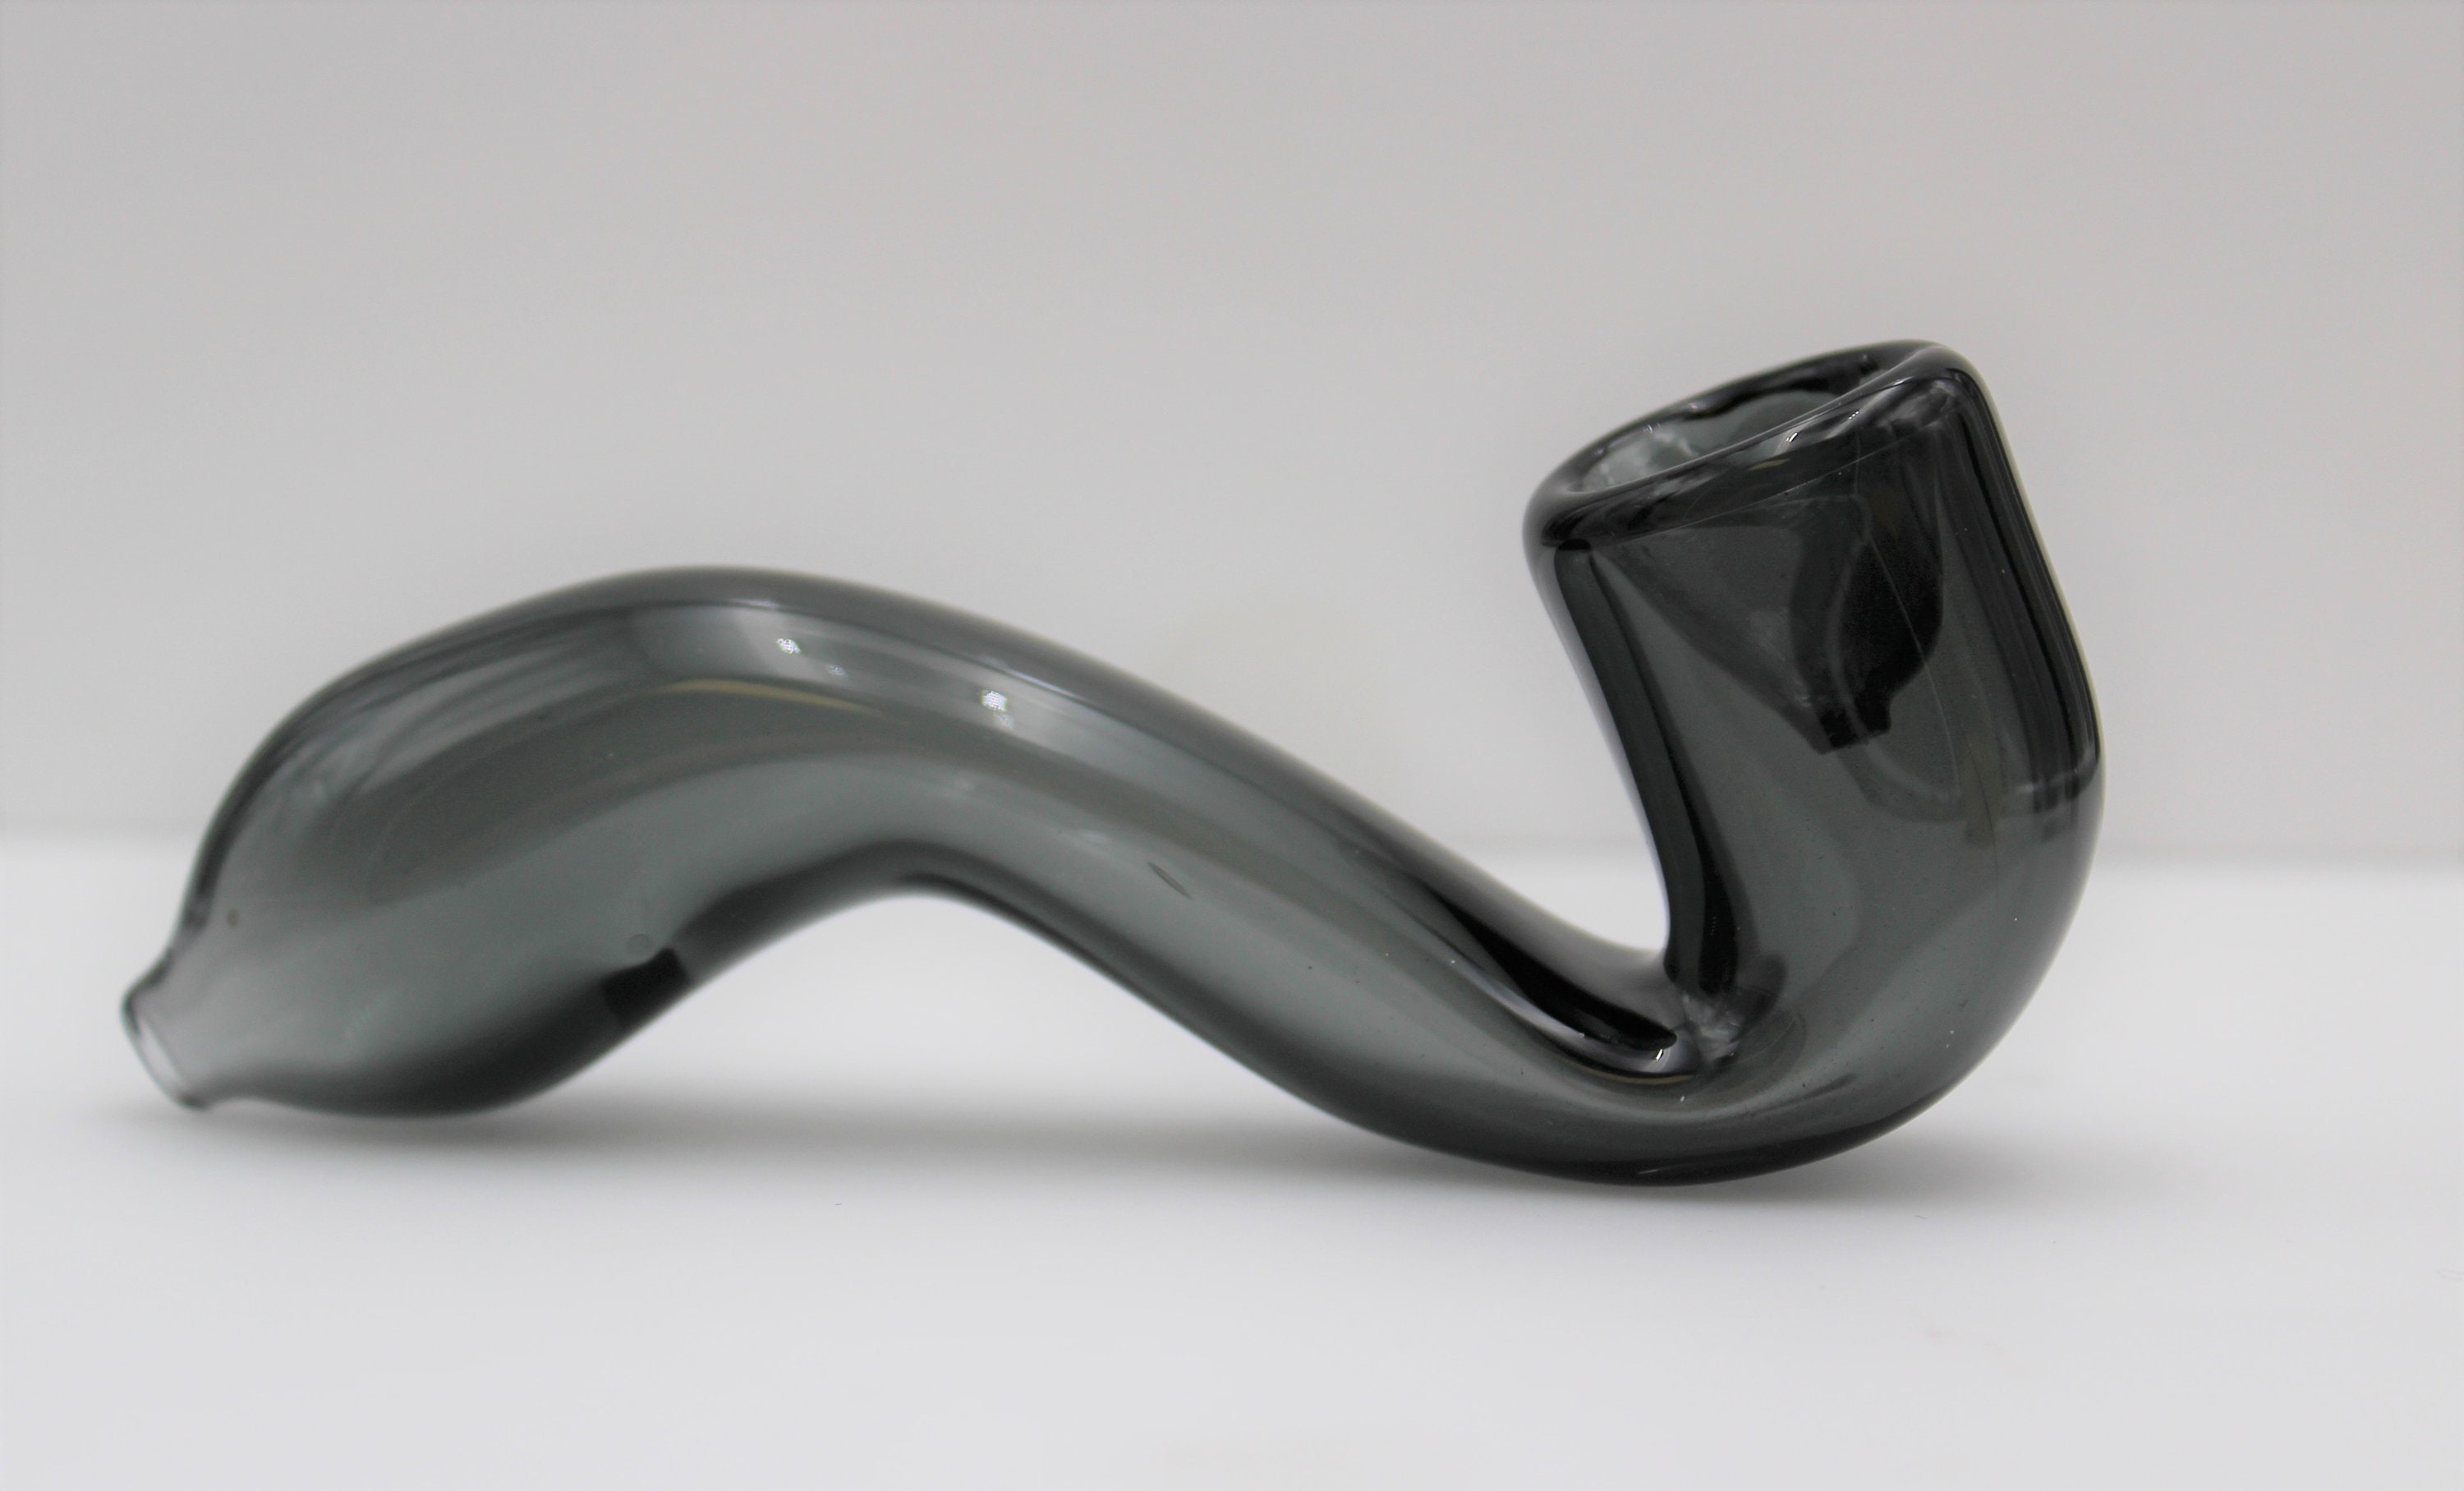 4 INFINITY BLUE CHAMELEON Glass Tobacco Pipe – The Hippie Momma Shop